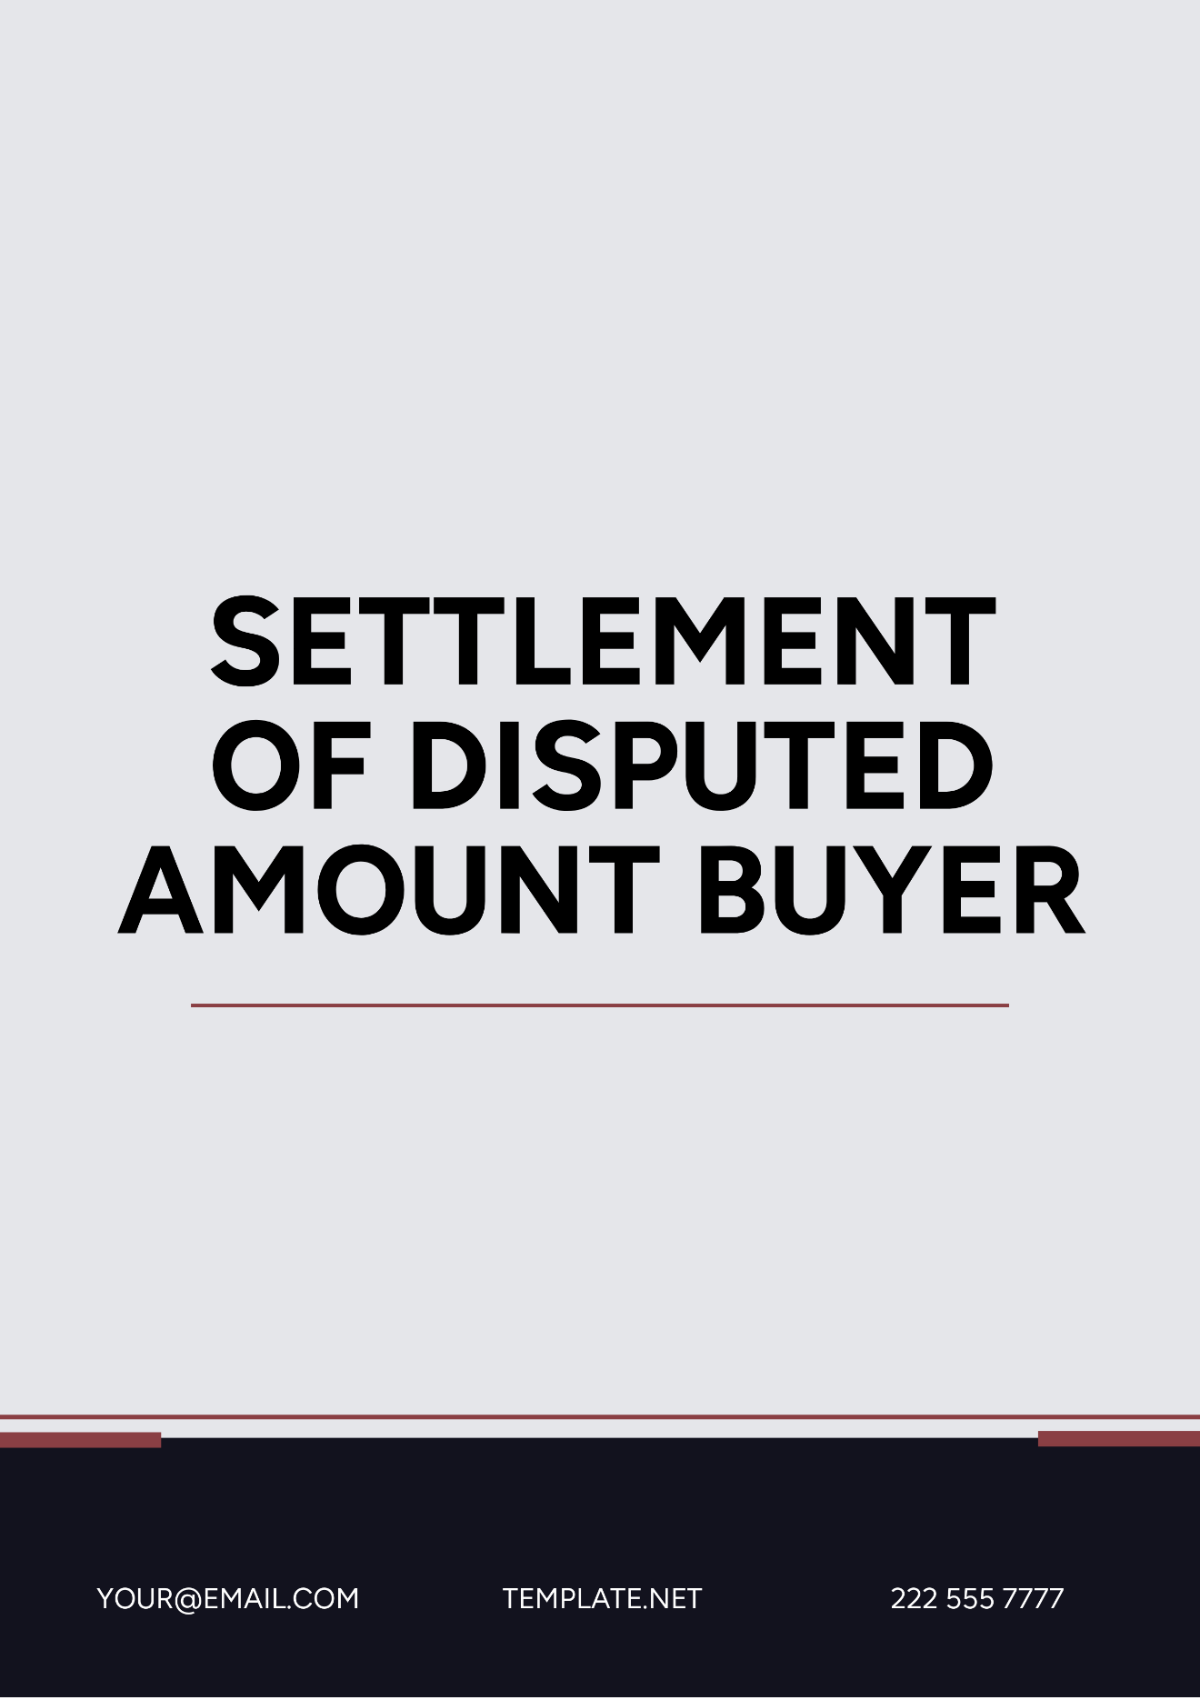 Free Settlement of Disputed Amount Buyer Template